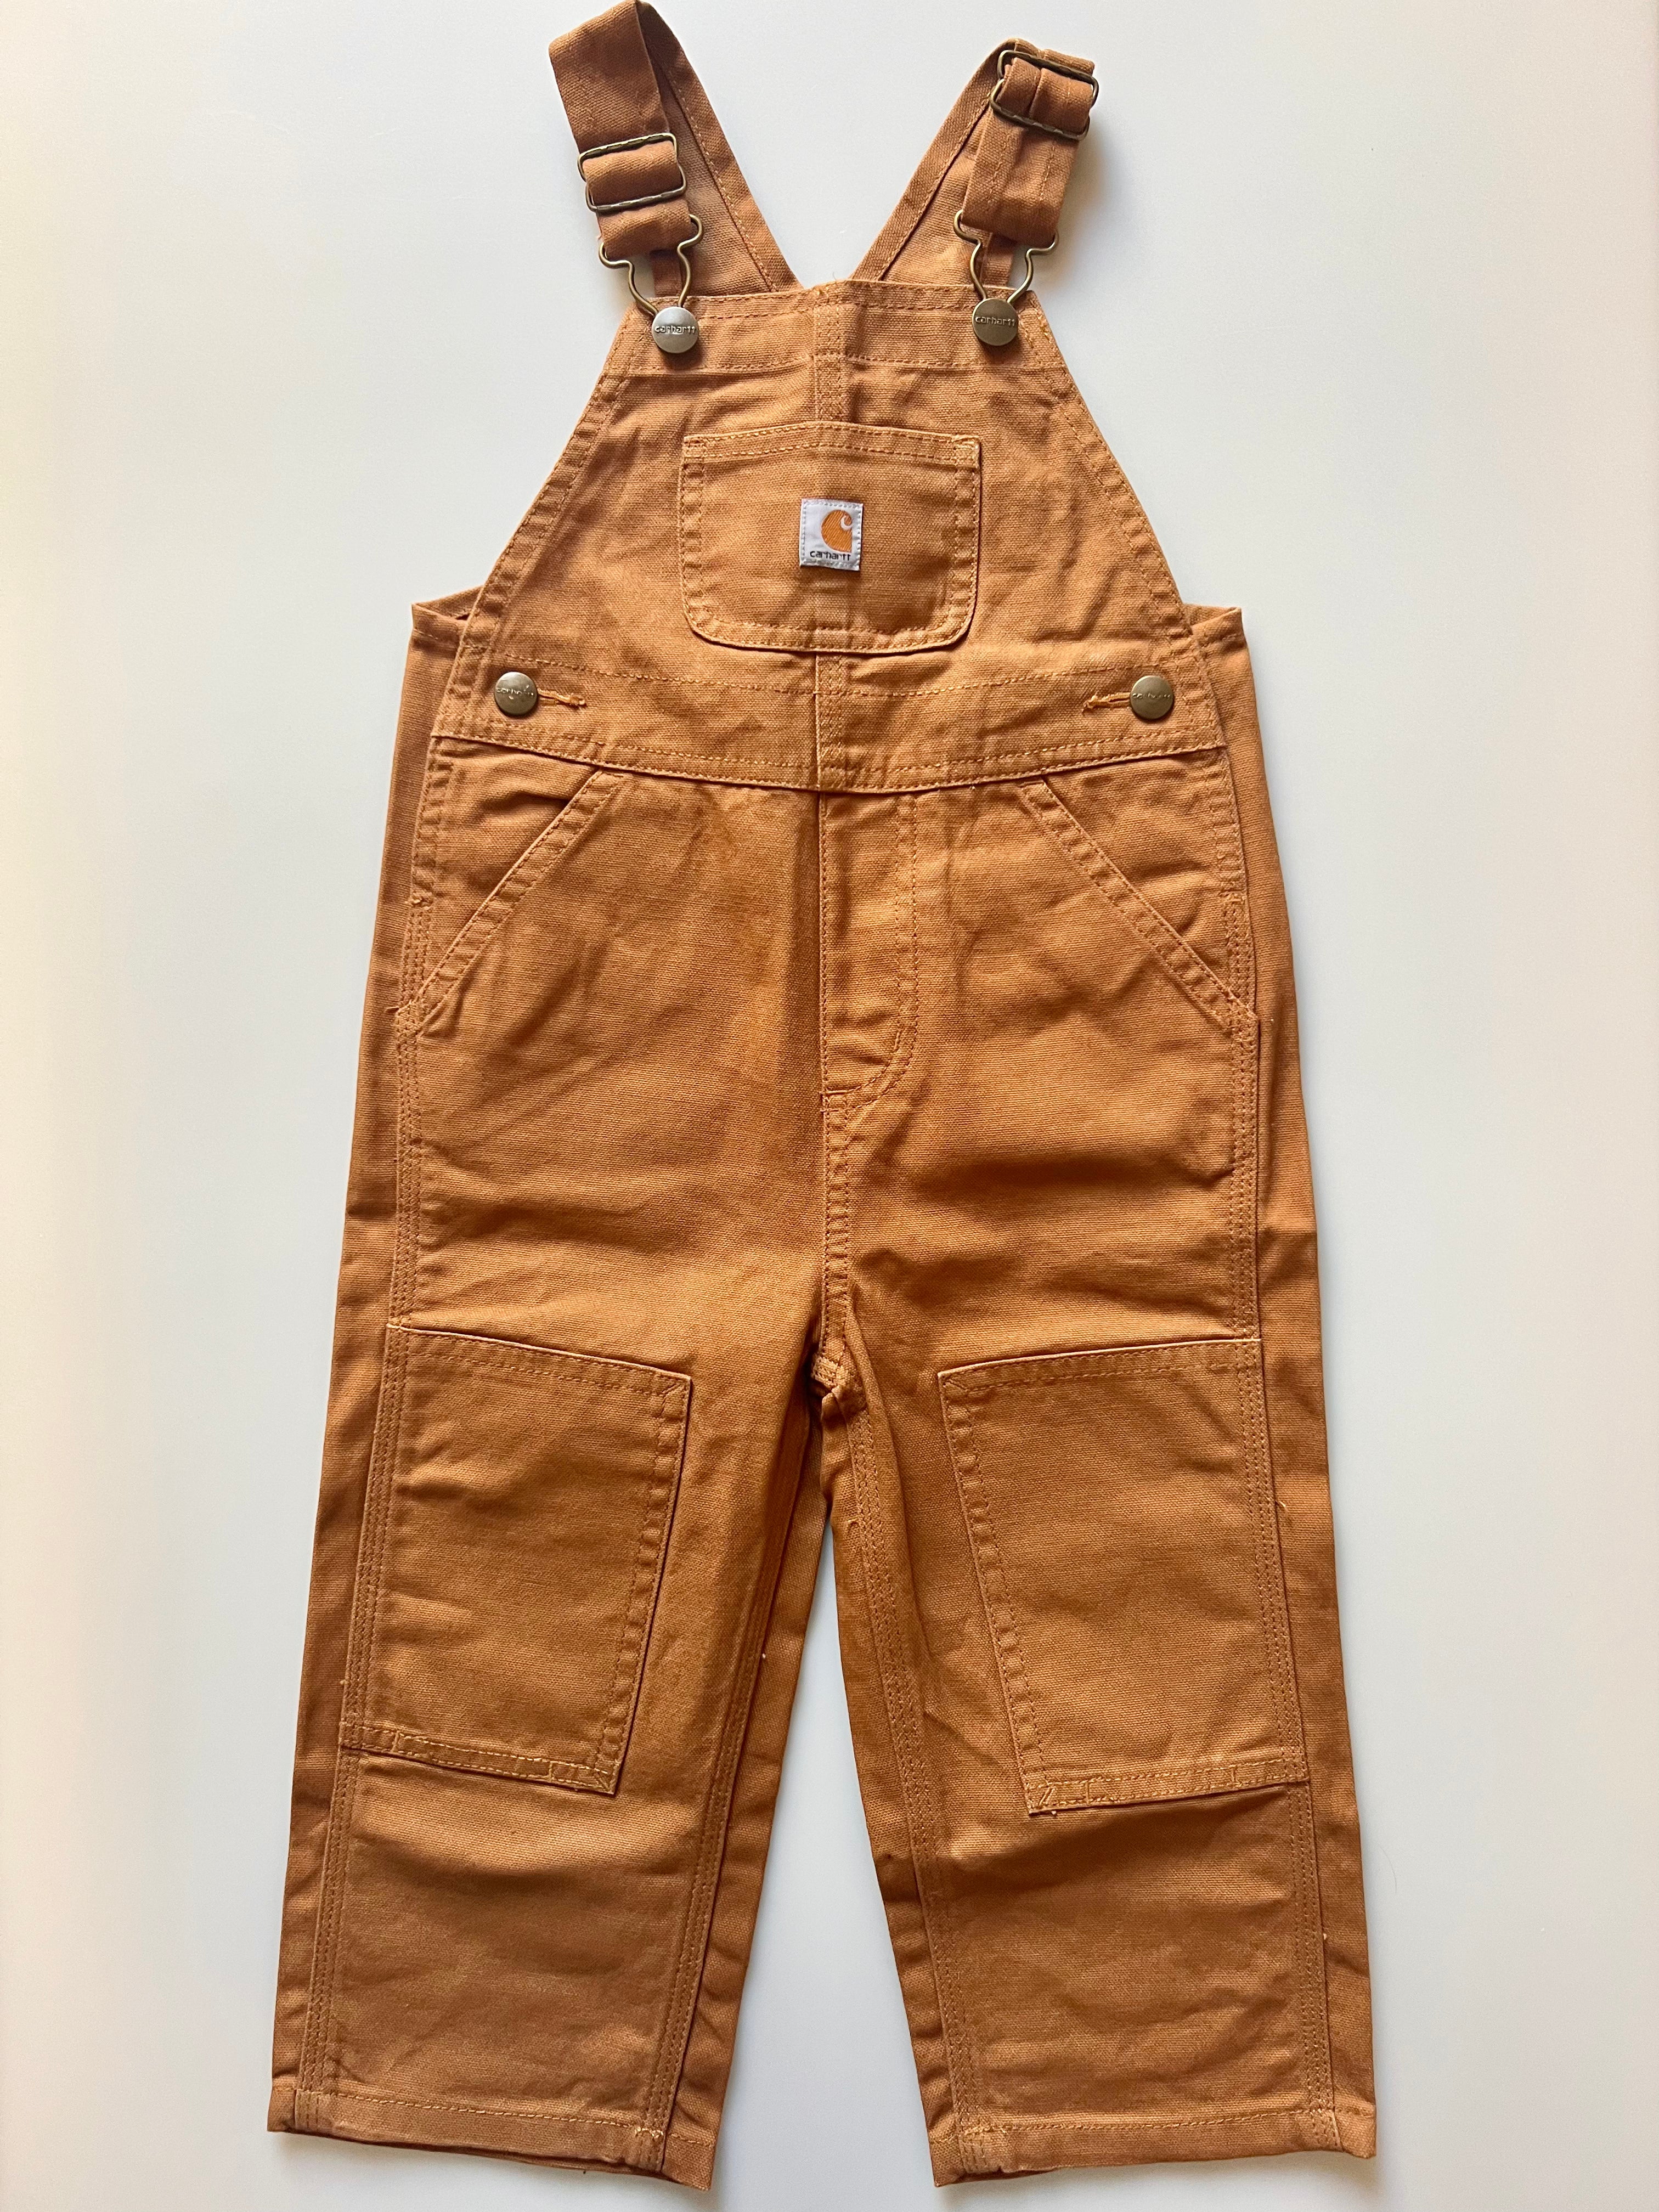 NEW Carhartt Canvas Duck Dungarees Age 2